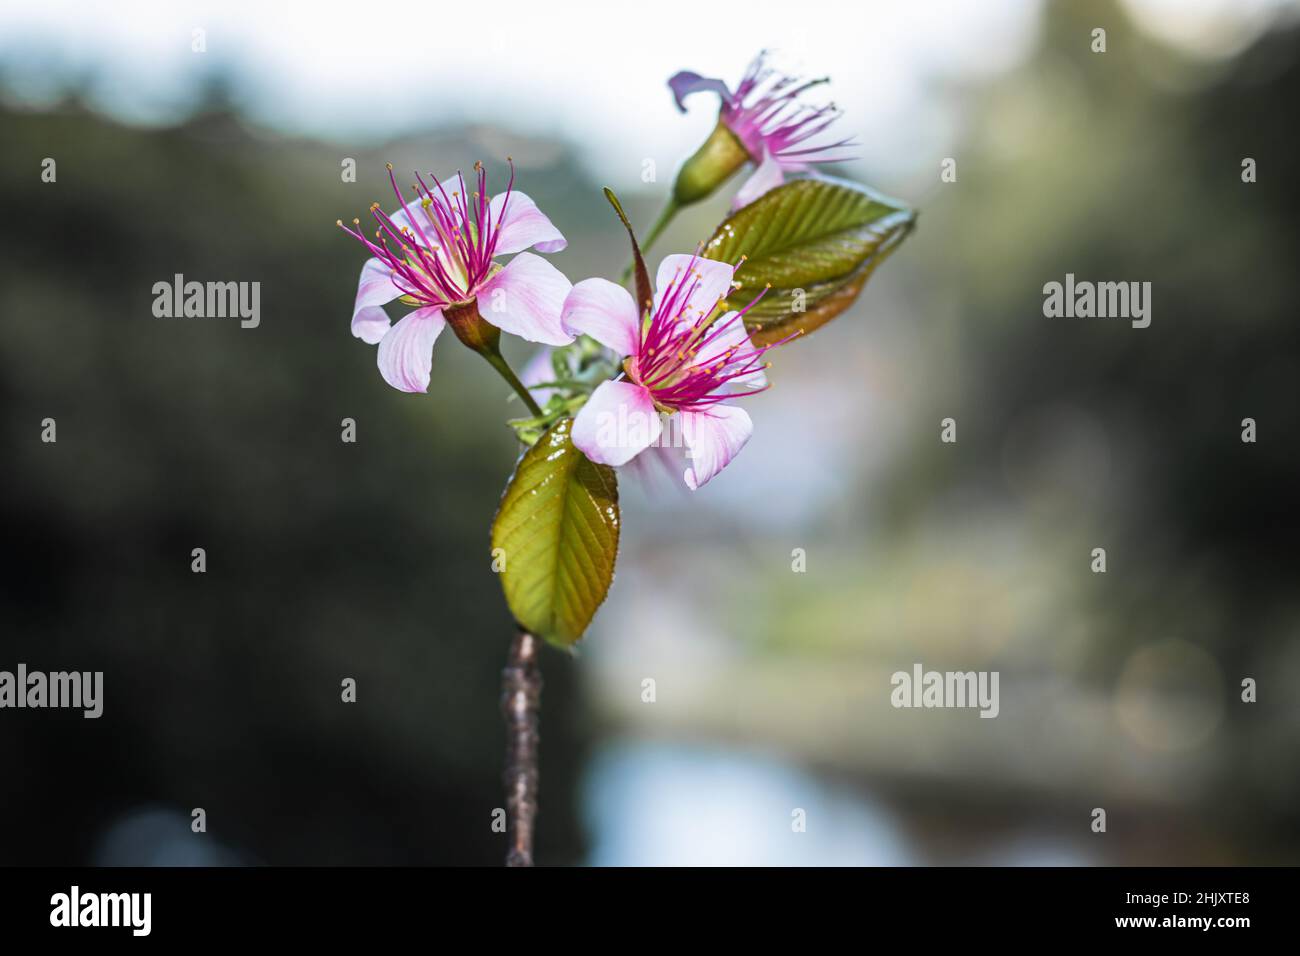 pink cherry blossom flowers with blurred background at afternoon image is taken at shillong meghalaya india. Stock Photo